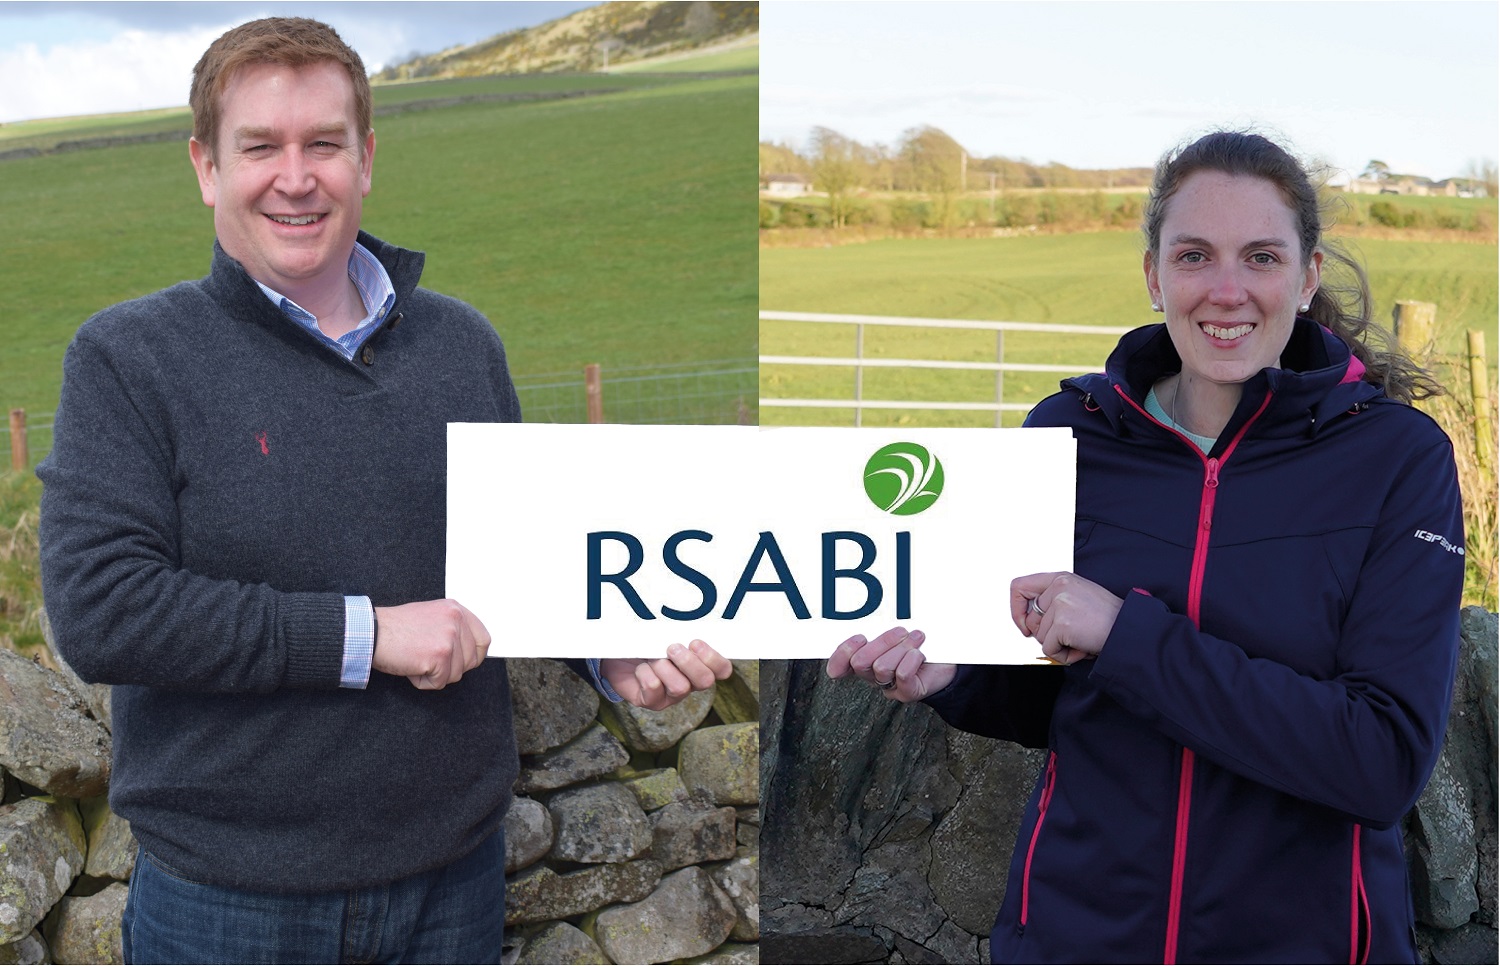 RSABI’s new trustees Stephen Young and Rebecca Dawes